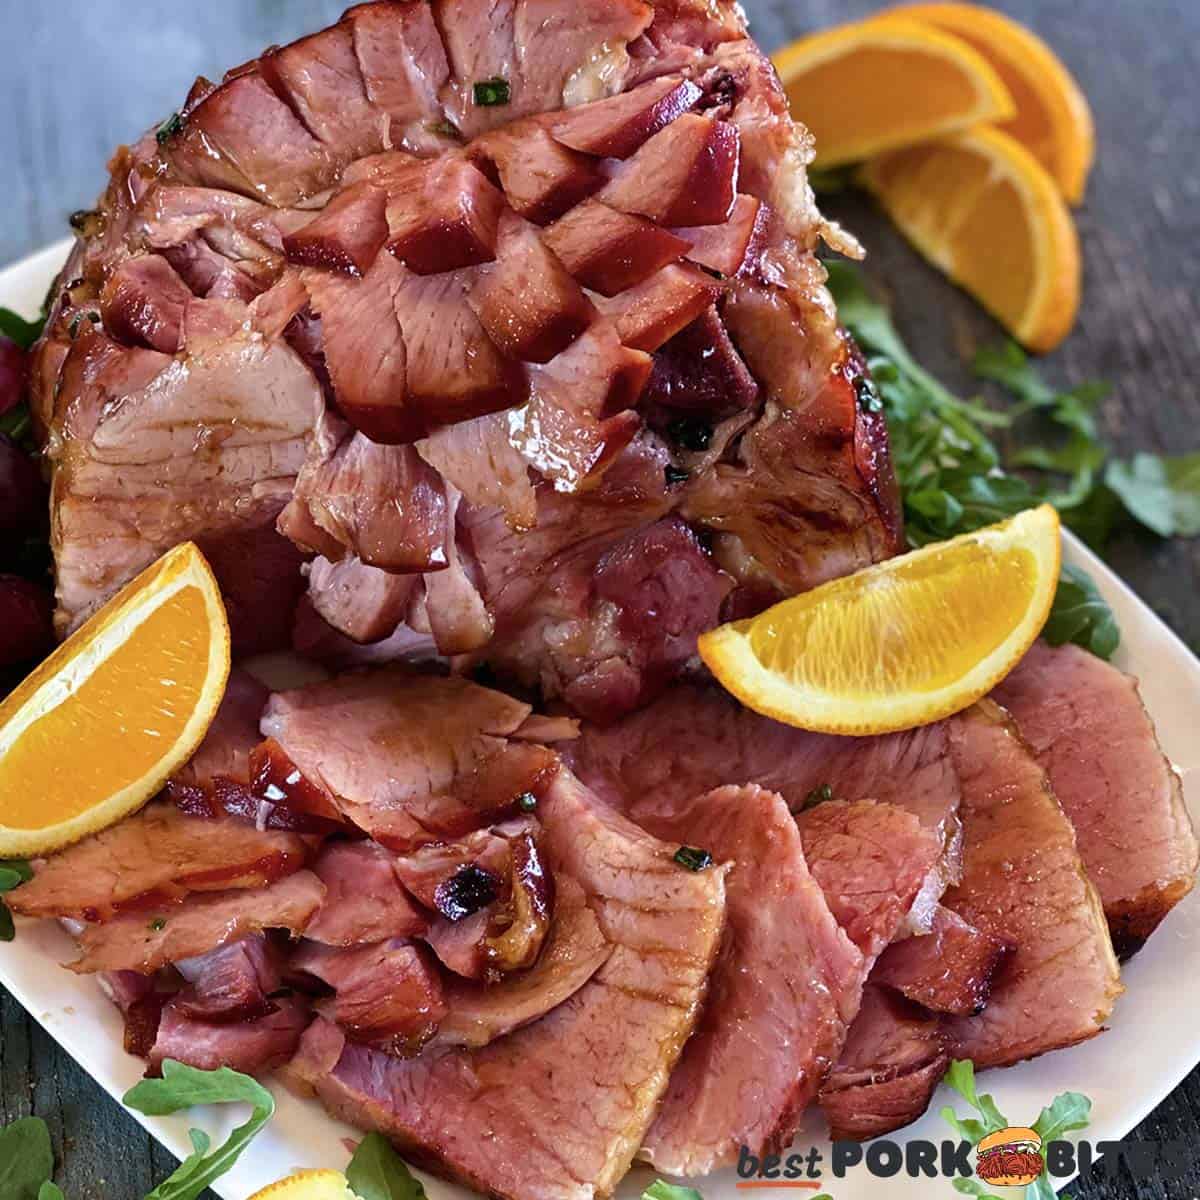 completed instant pot ham on a white plate with orange slices and arugula